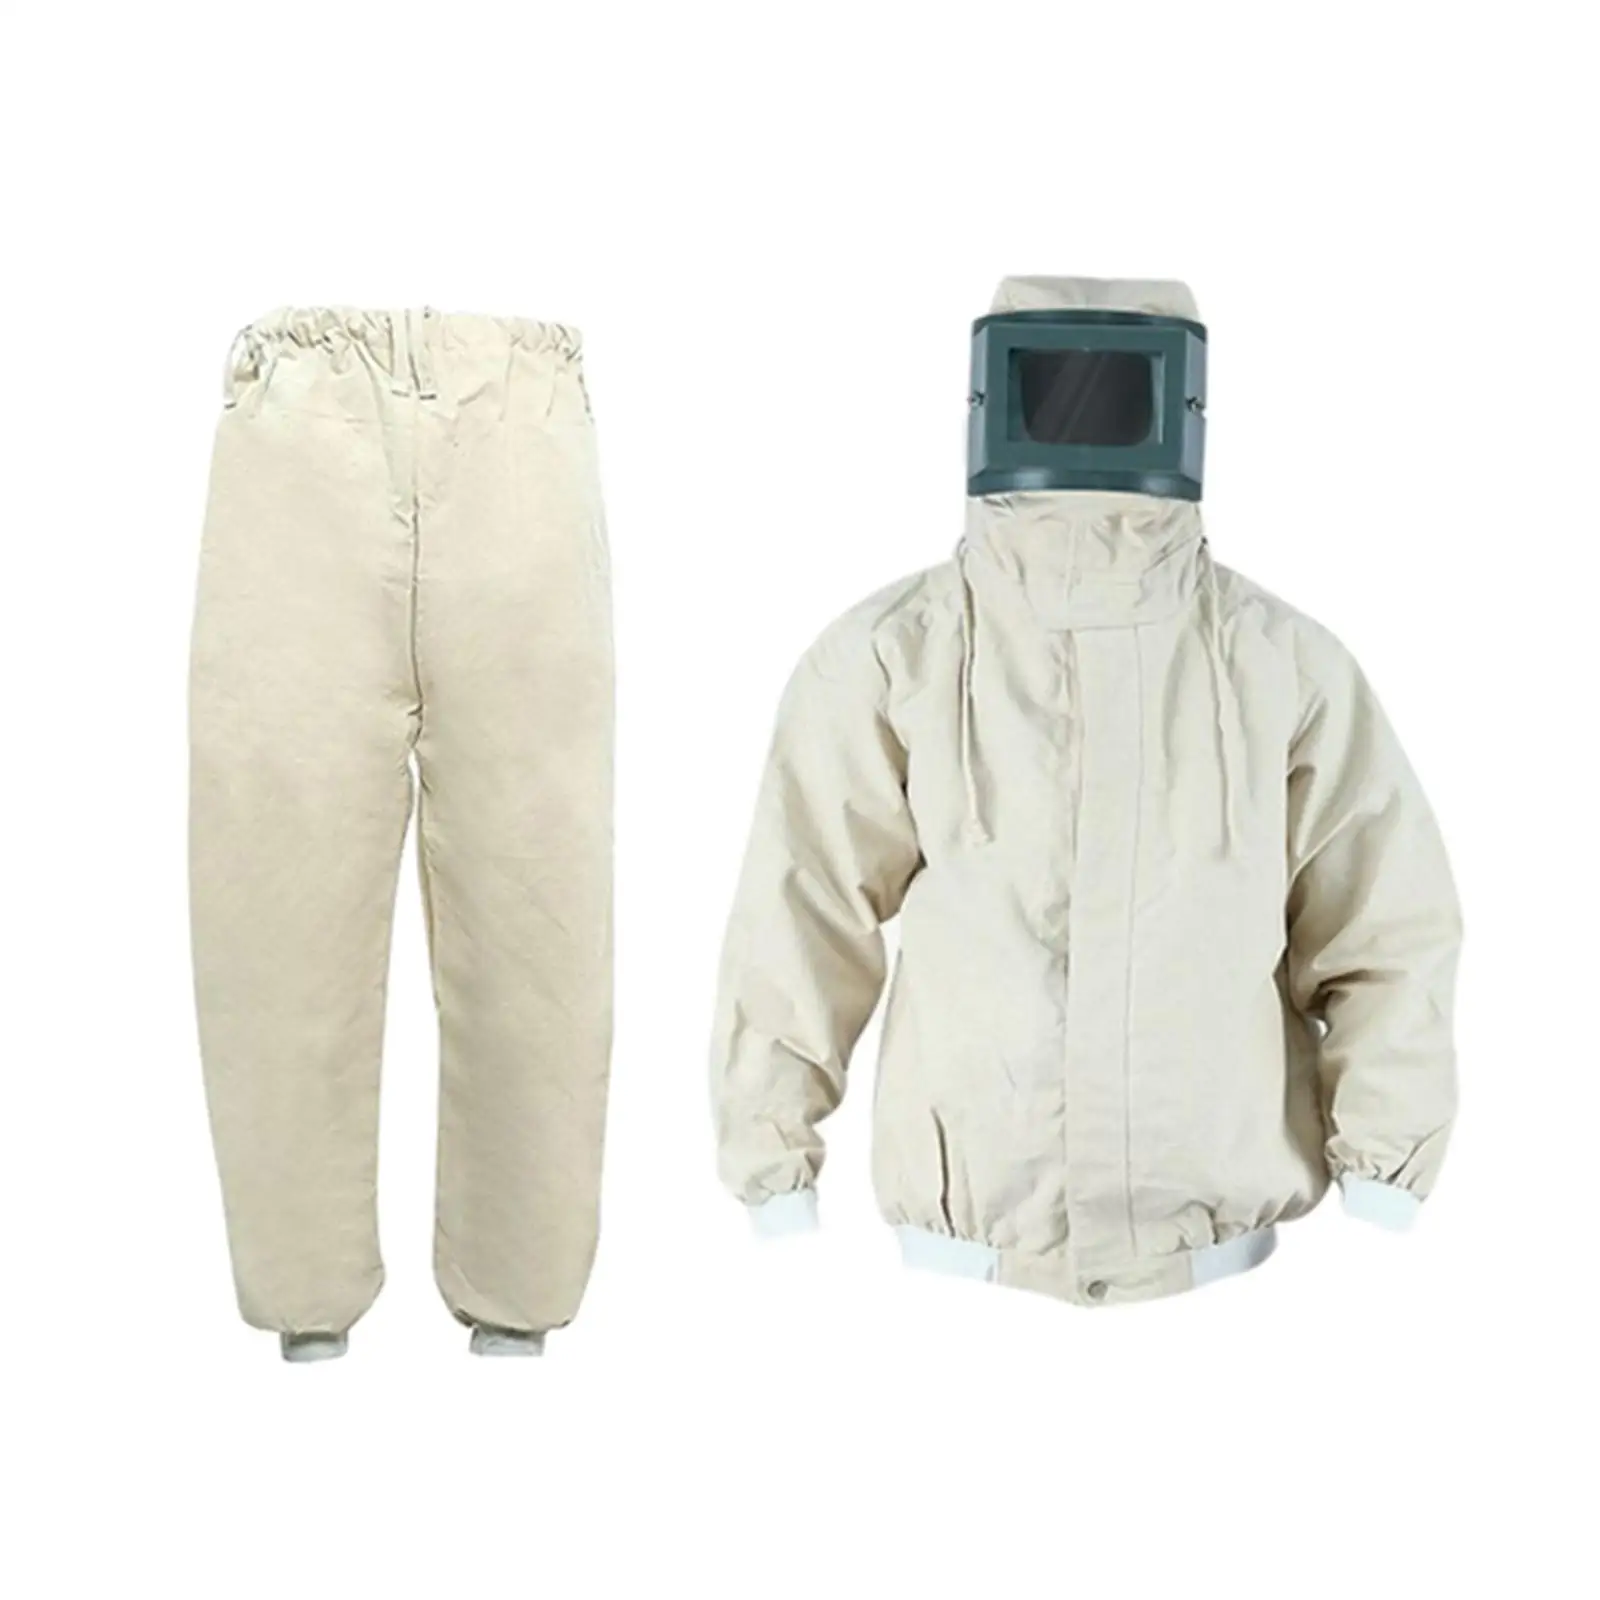 Extra Large Sandblasting Clothing Breathable Safety Work Overalls Protective Coveralls for Shipbuilding Woodworking